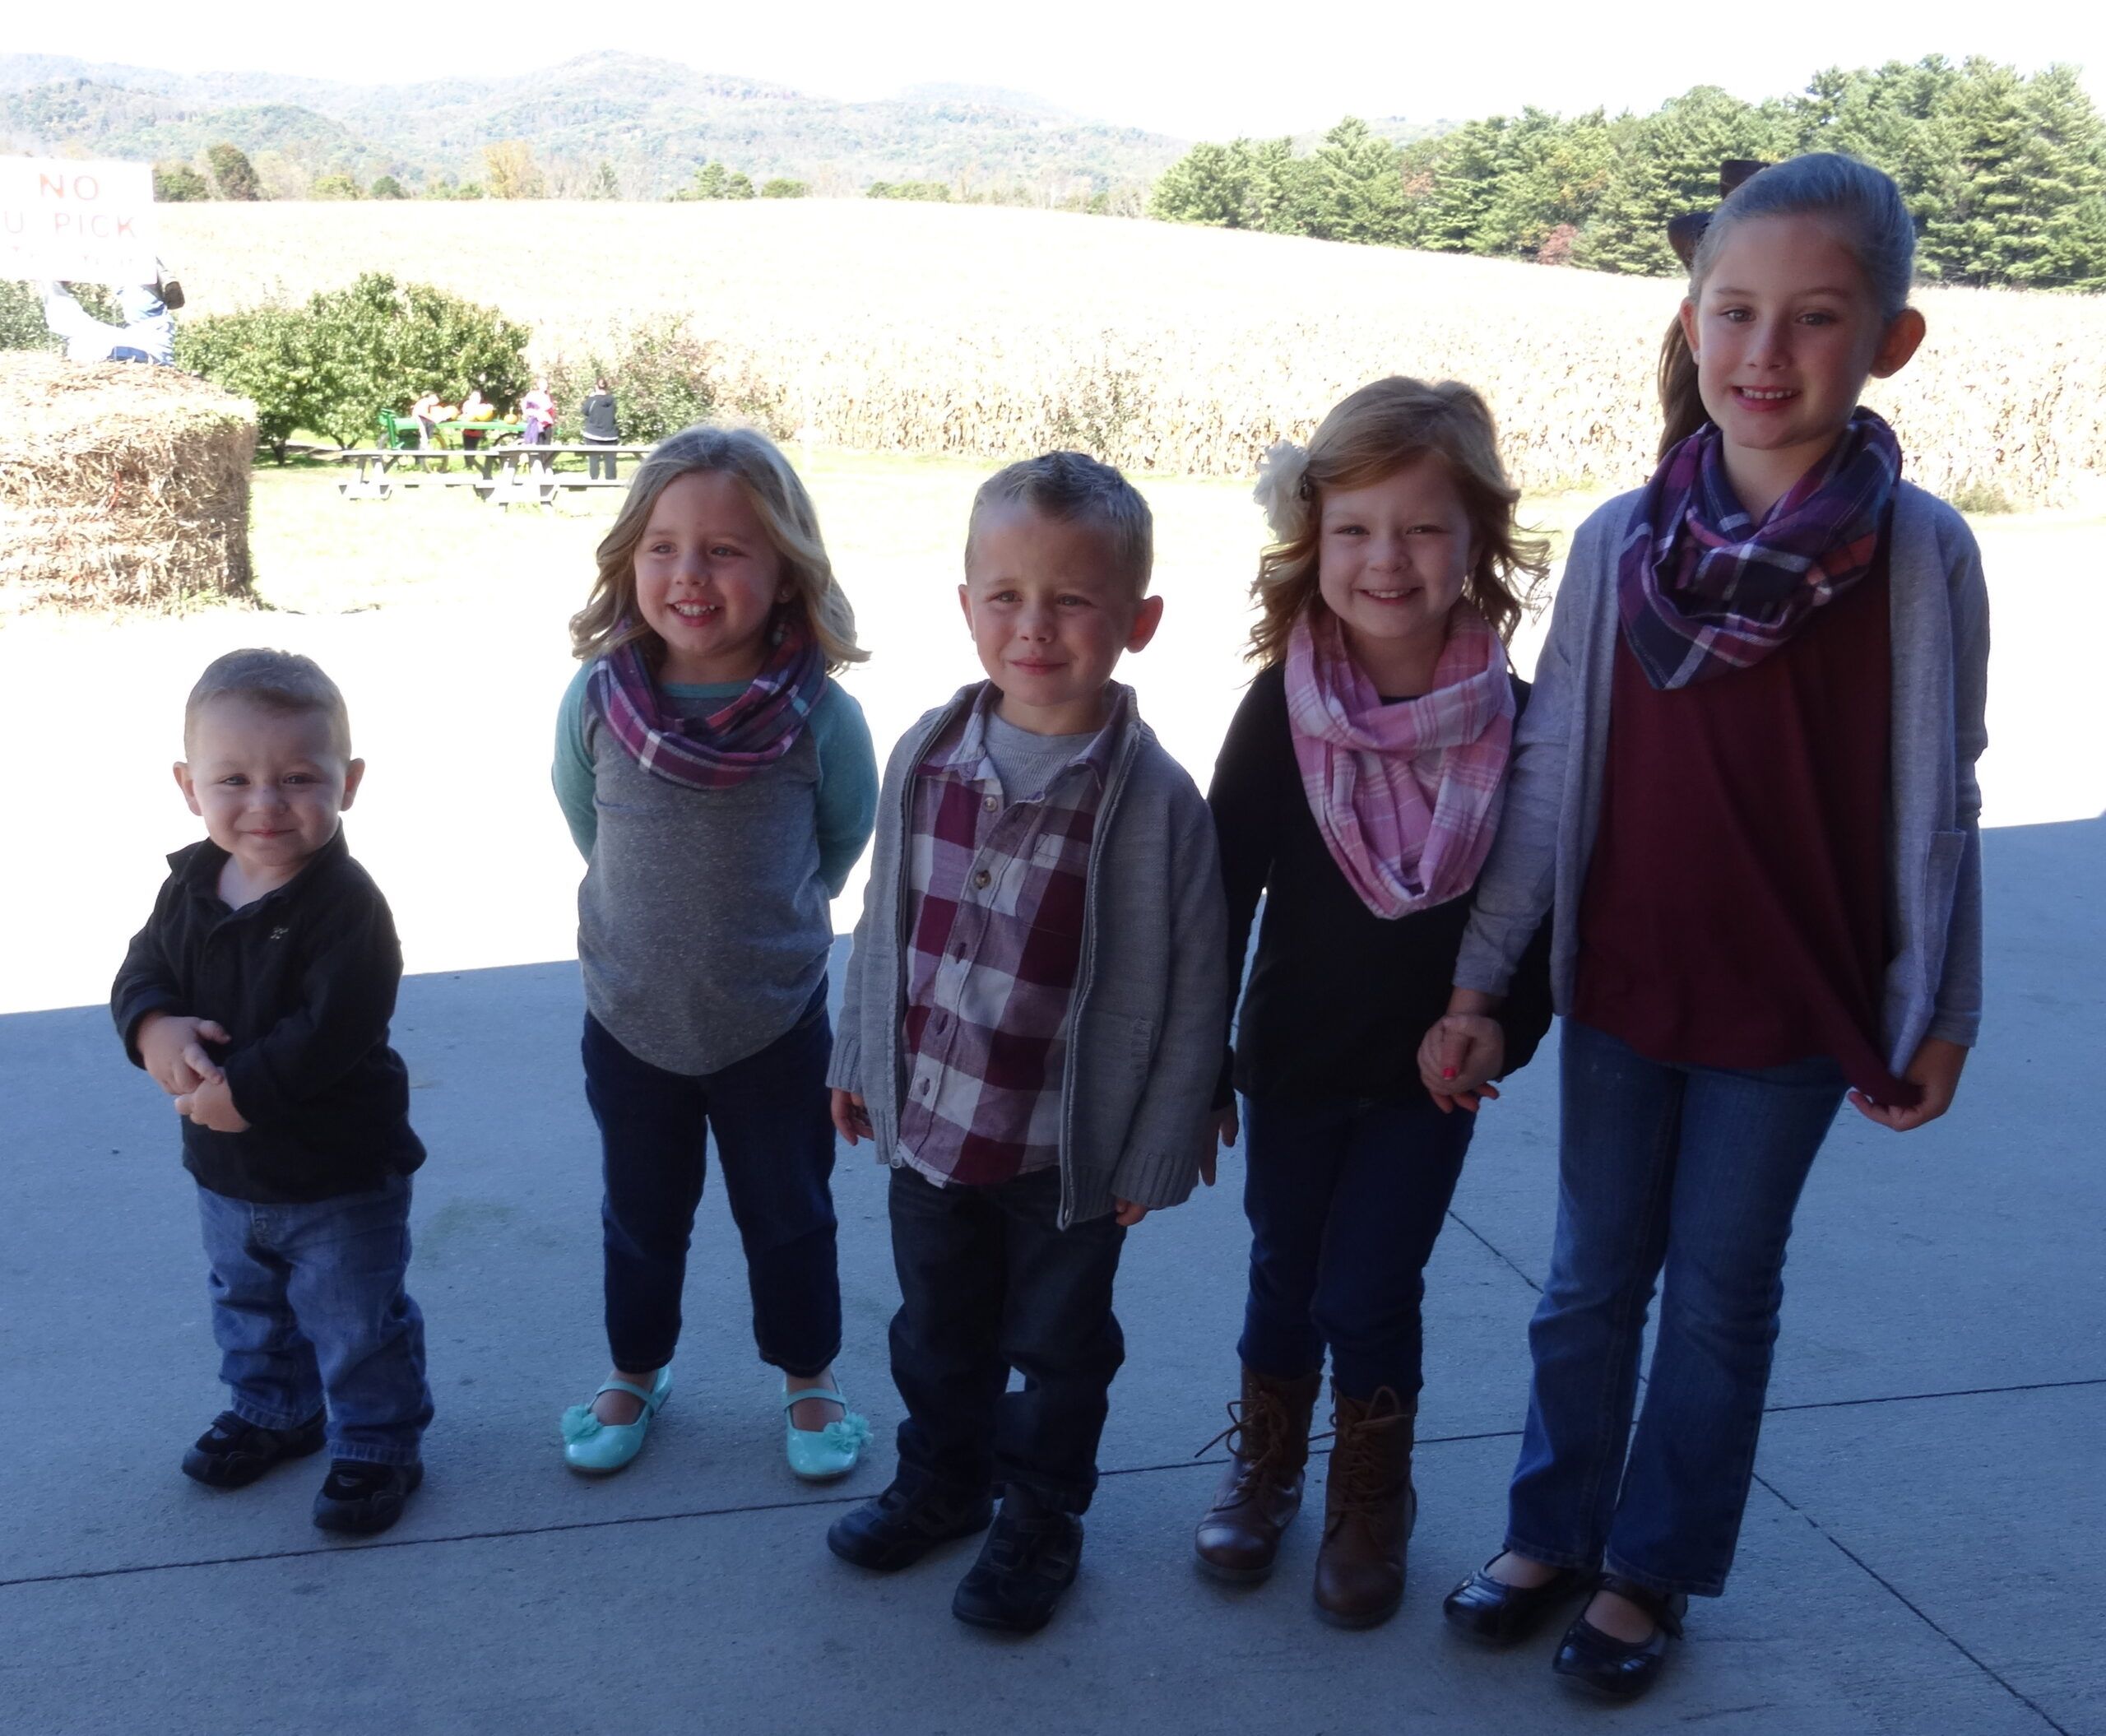 Michelle Cox's grandkids lined up in order of height